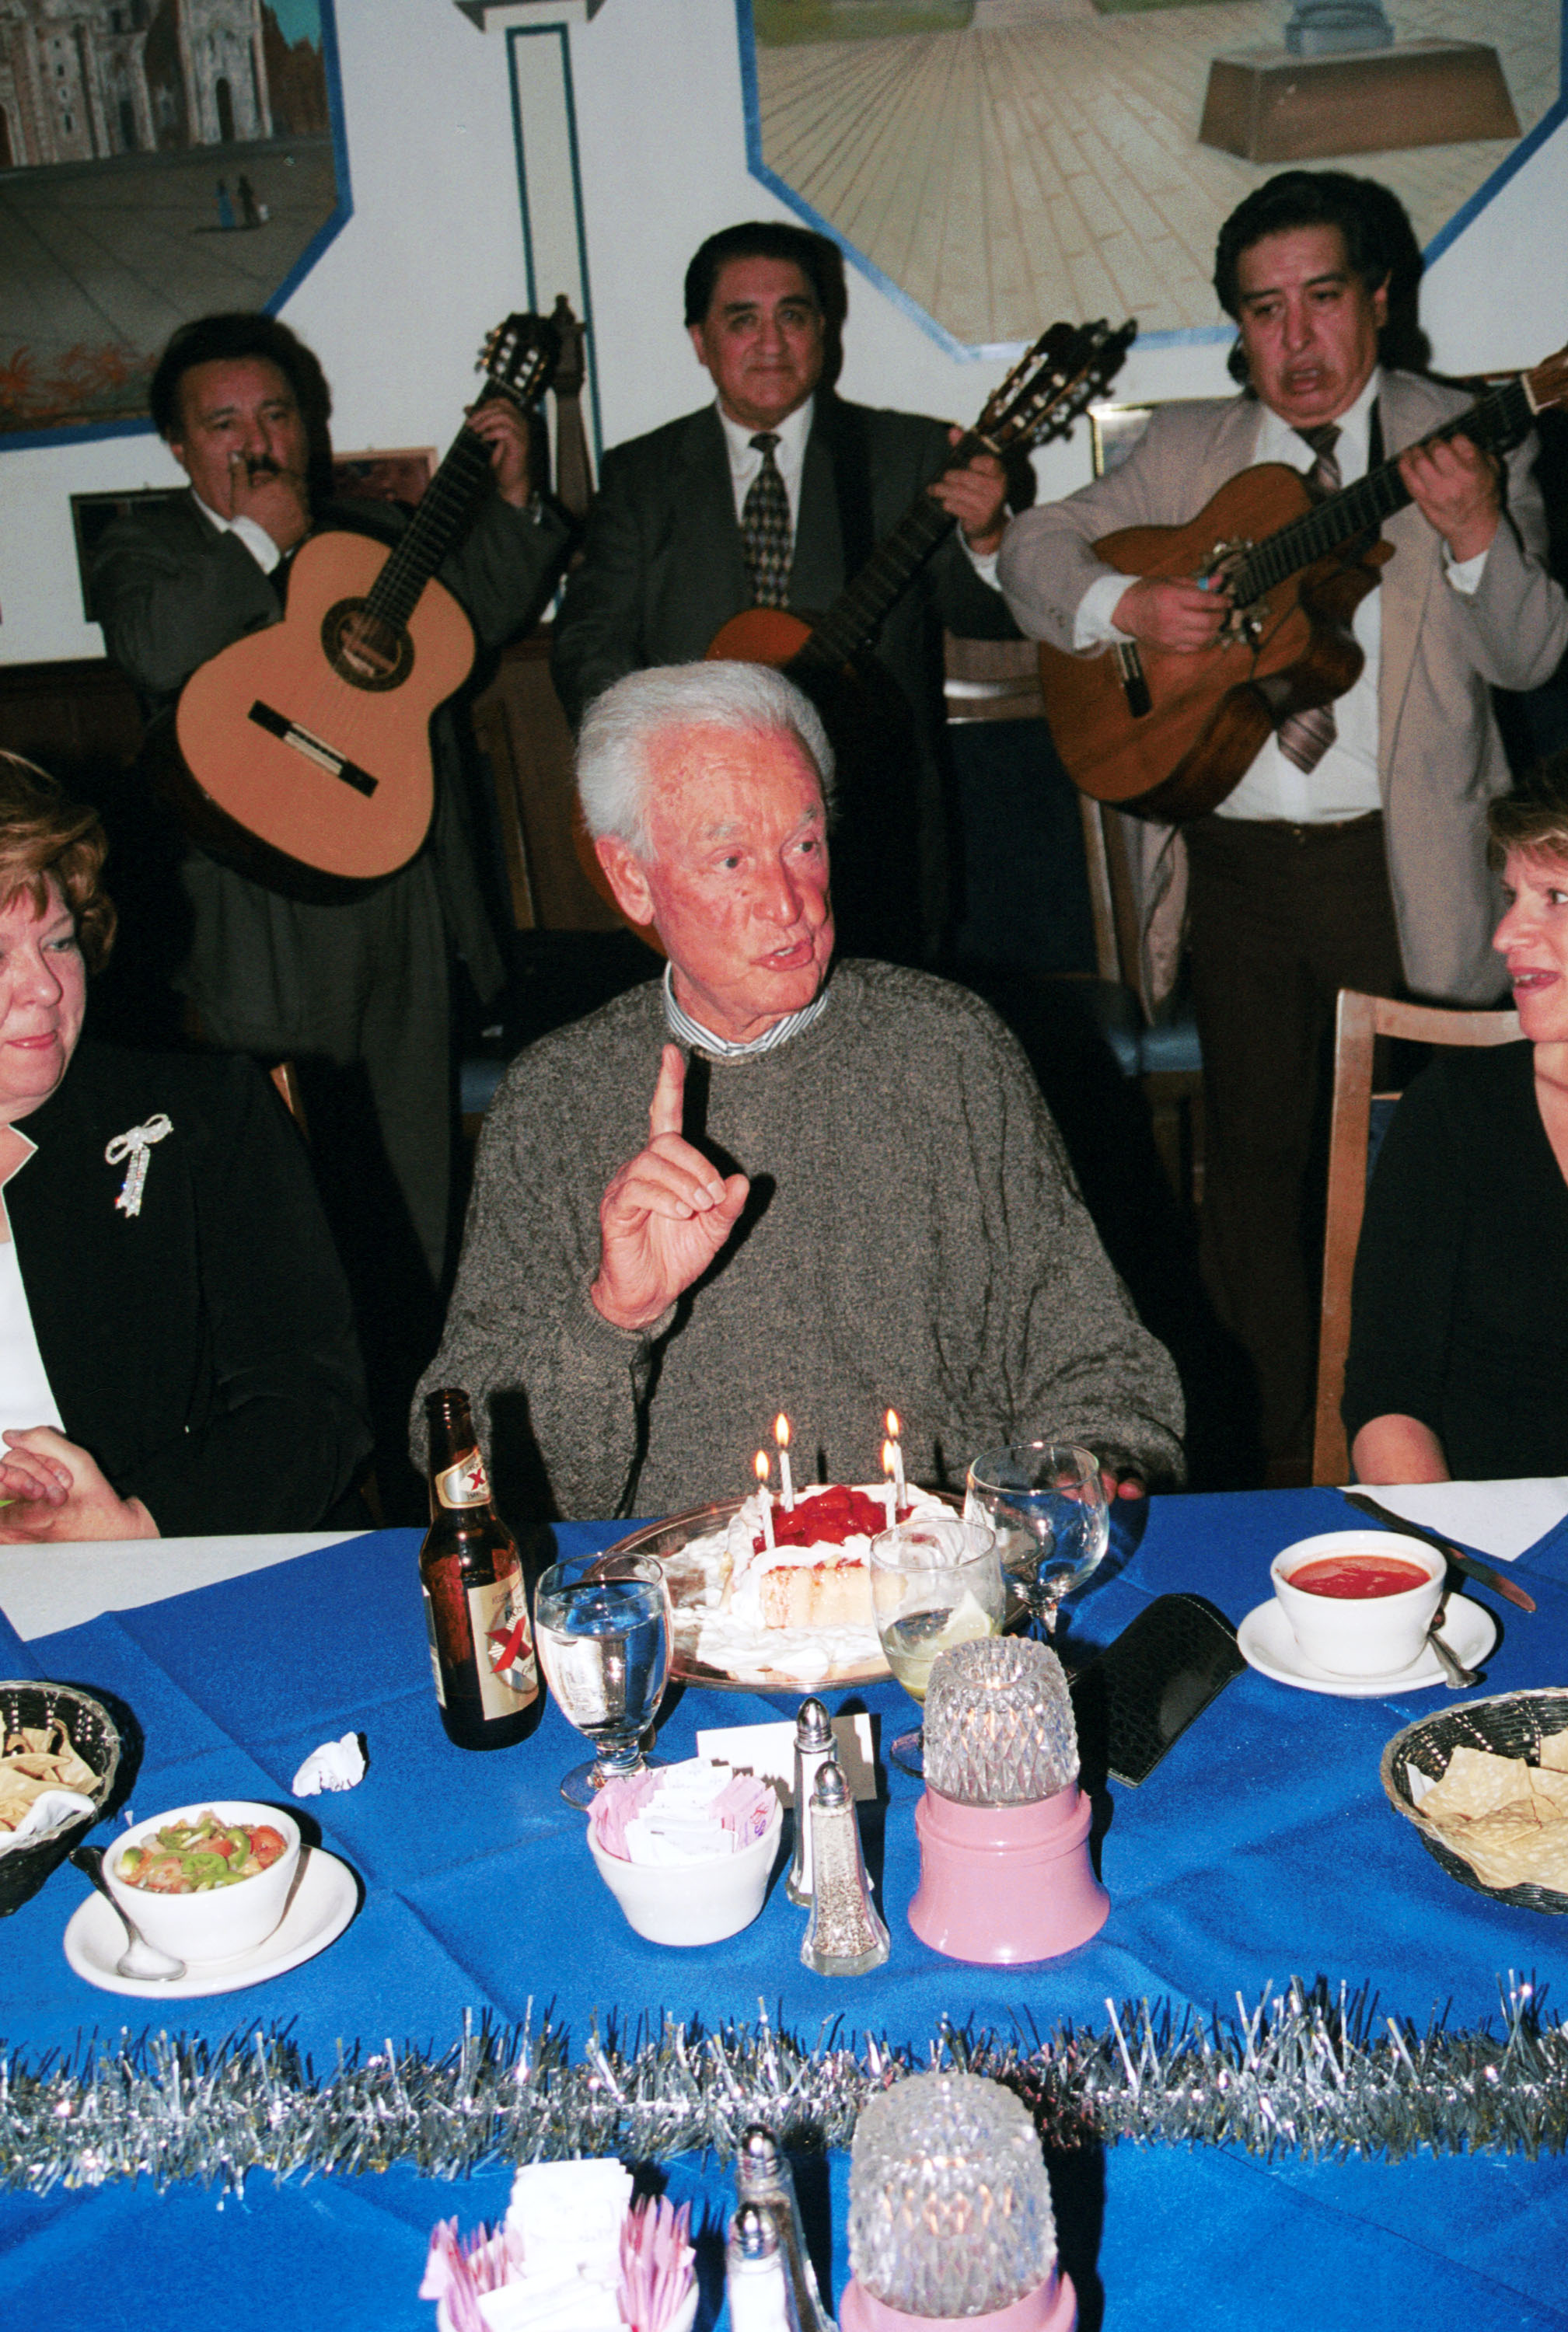  Game show host Bob Barker (C) blows out candles during his 79th birthday party at Antonios restaurant December 13, 2002 in West Hollywood, California. | Source: Getty Images